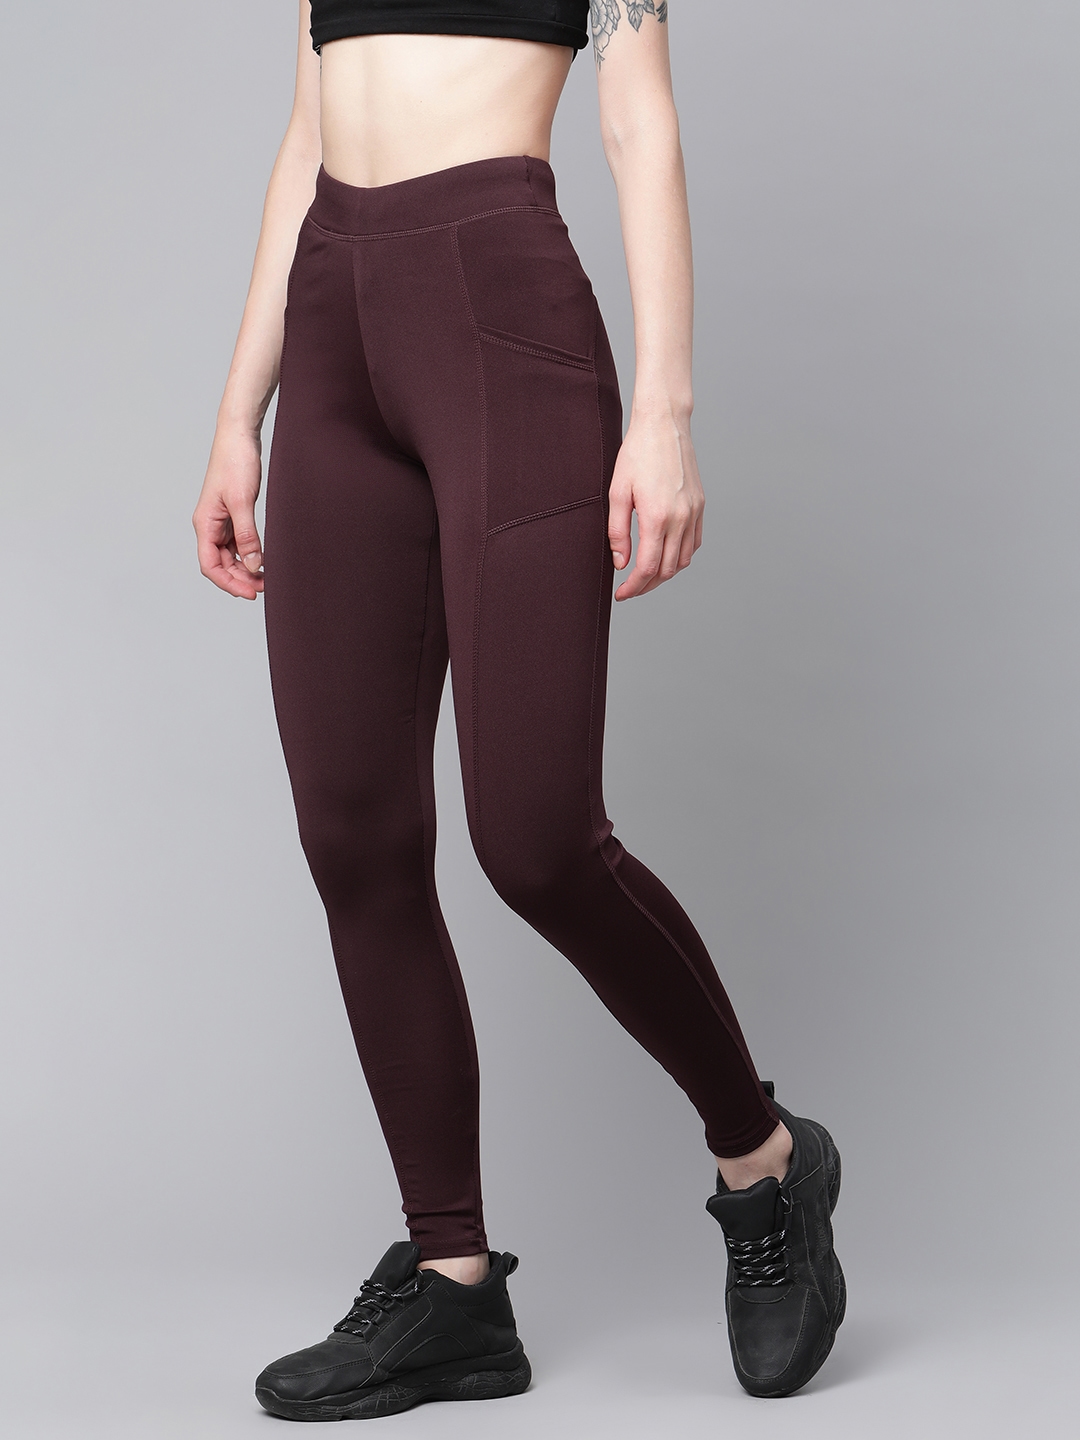 BLINKIN Stretchable Yoga Pants for Women & Gym Pants for